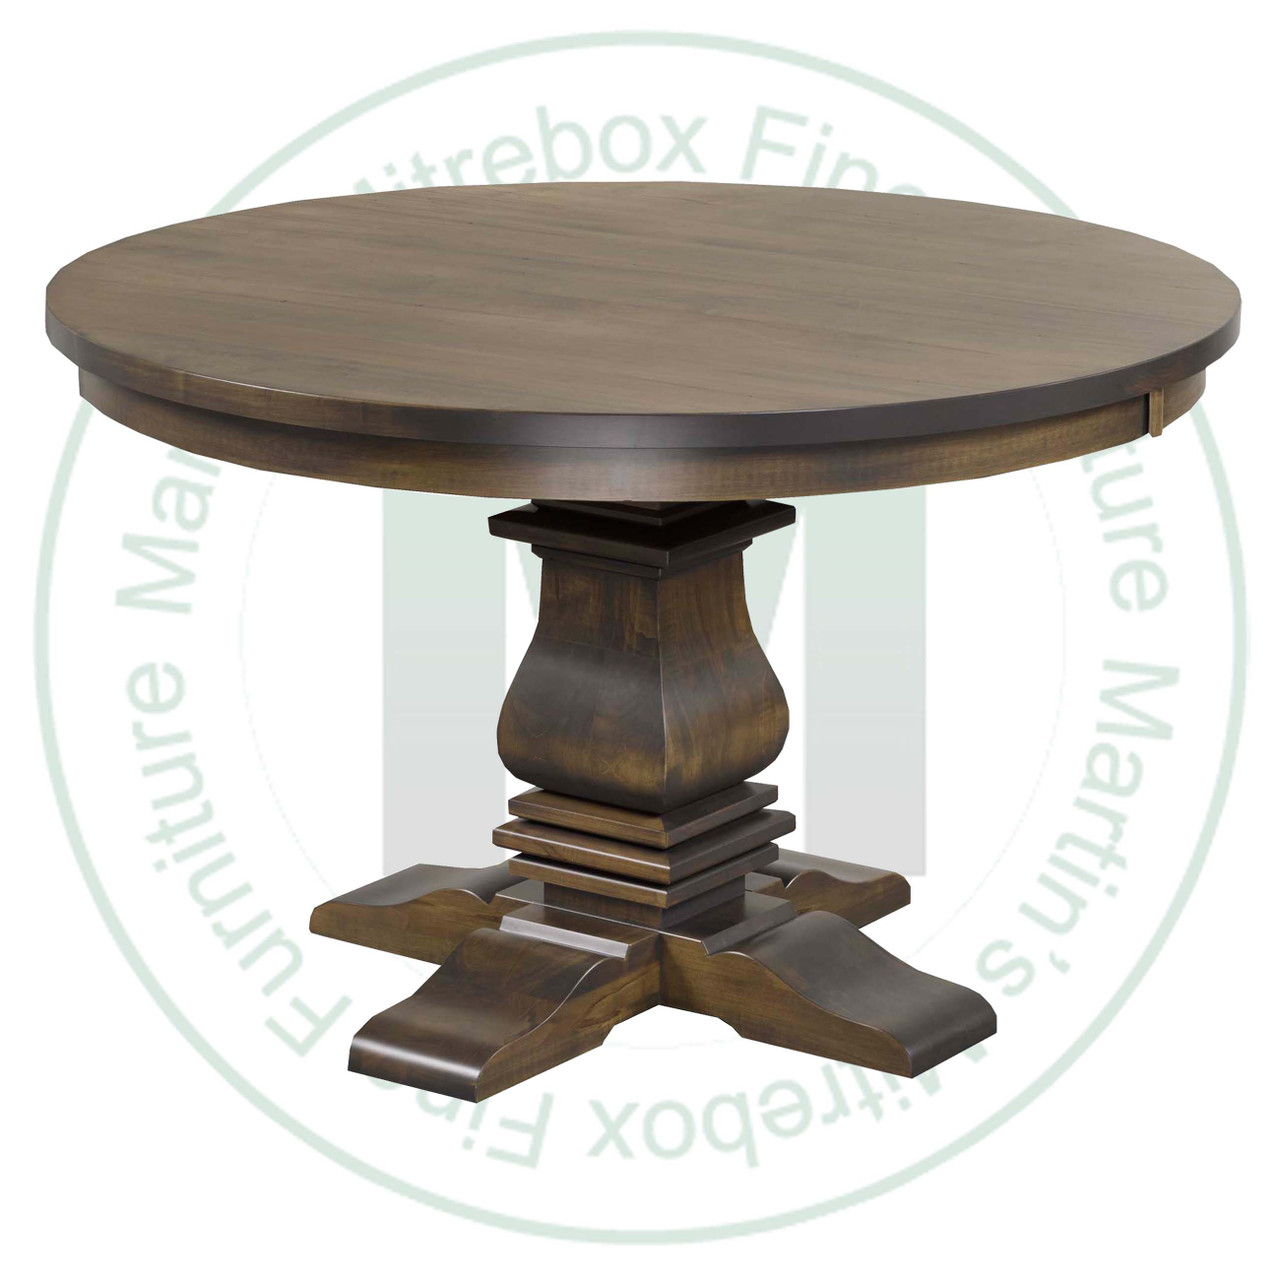 Maple Spartan Collection Single Pedestal Table 36''D x 42''W x 30''H. Table Has 1'' Thick Top